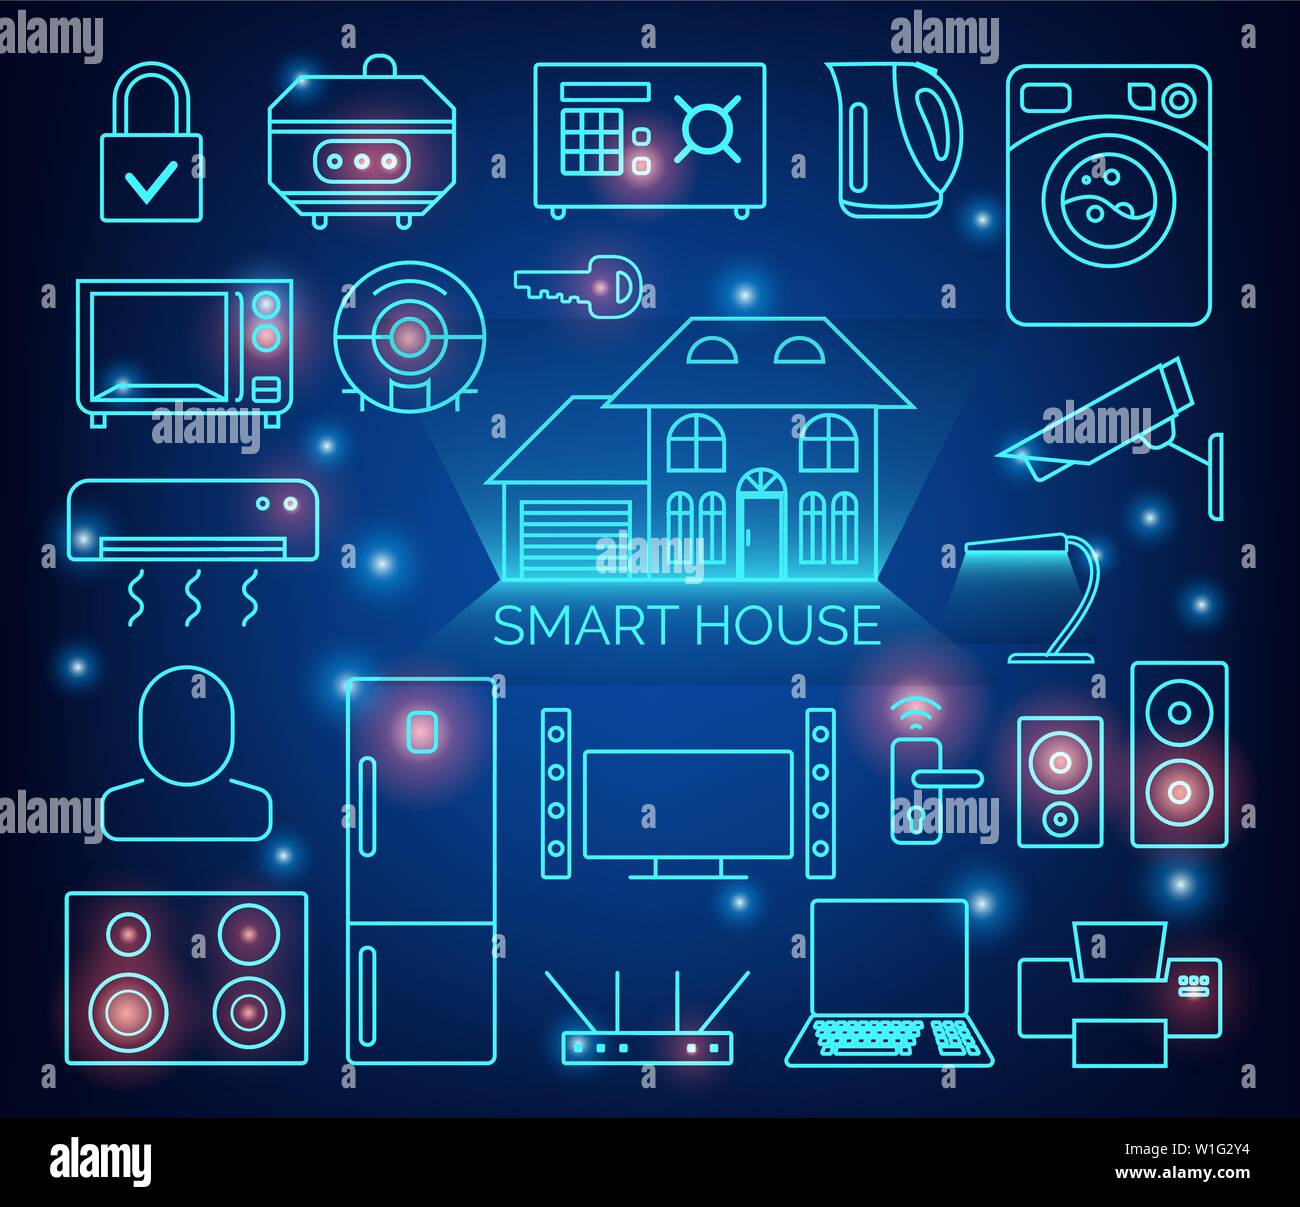 Smart home automation vector background. Connected smart home devices like phone, smart watch, tablet, sensors, appliances. Network of connected Stock Vector